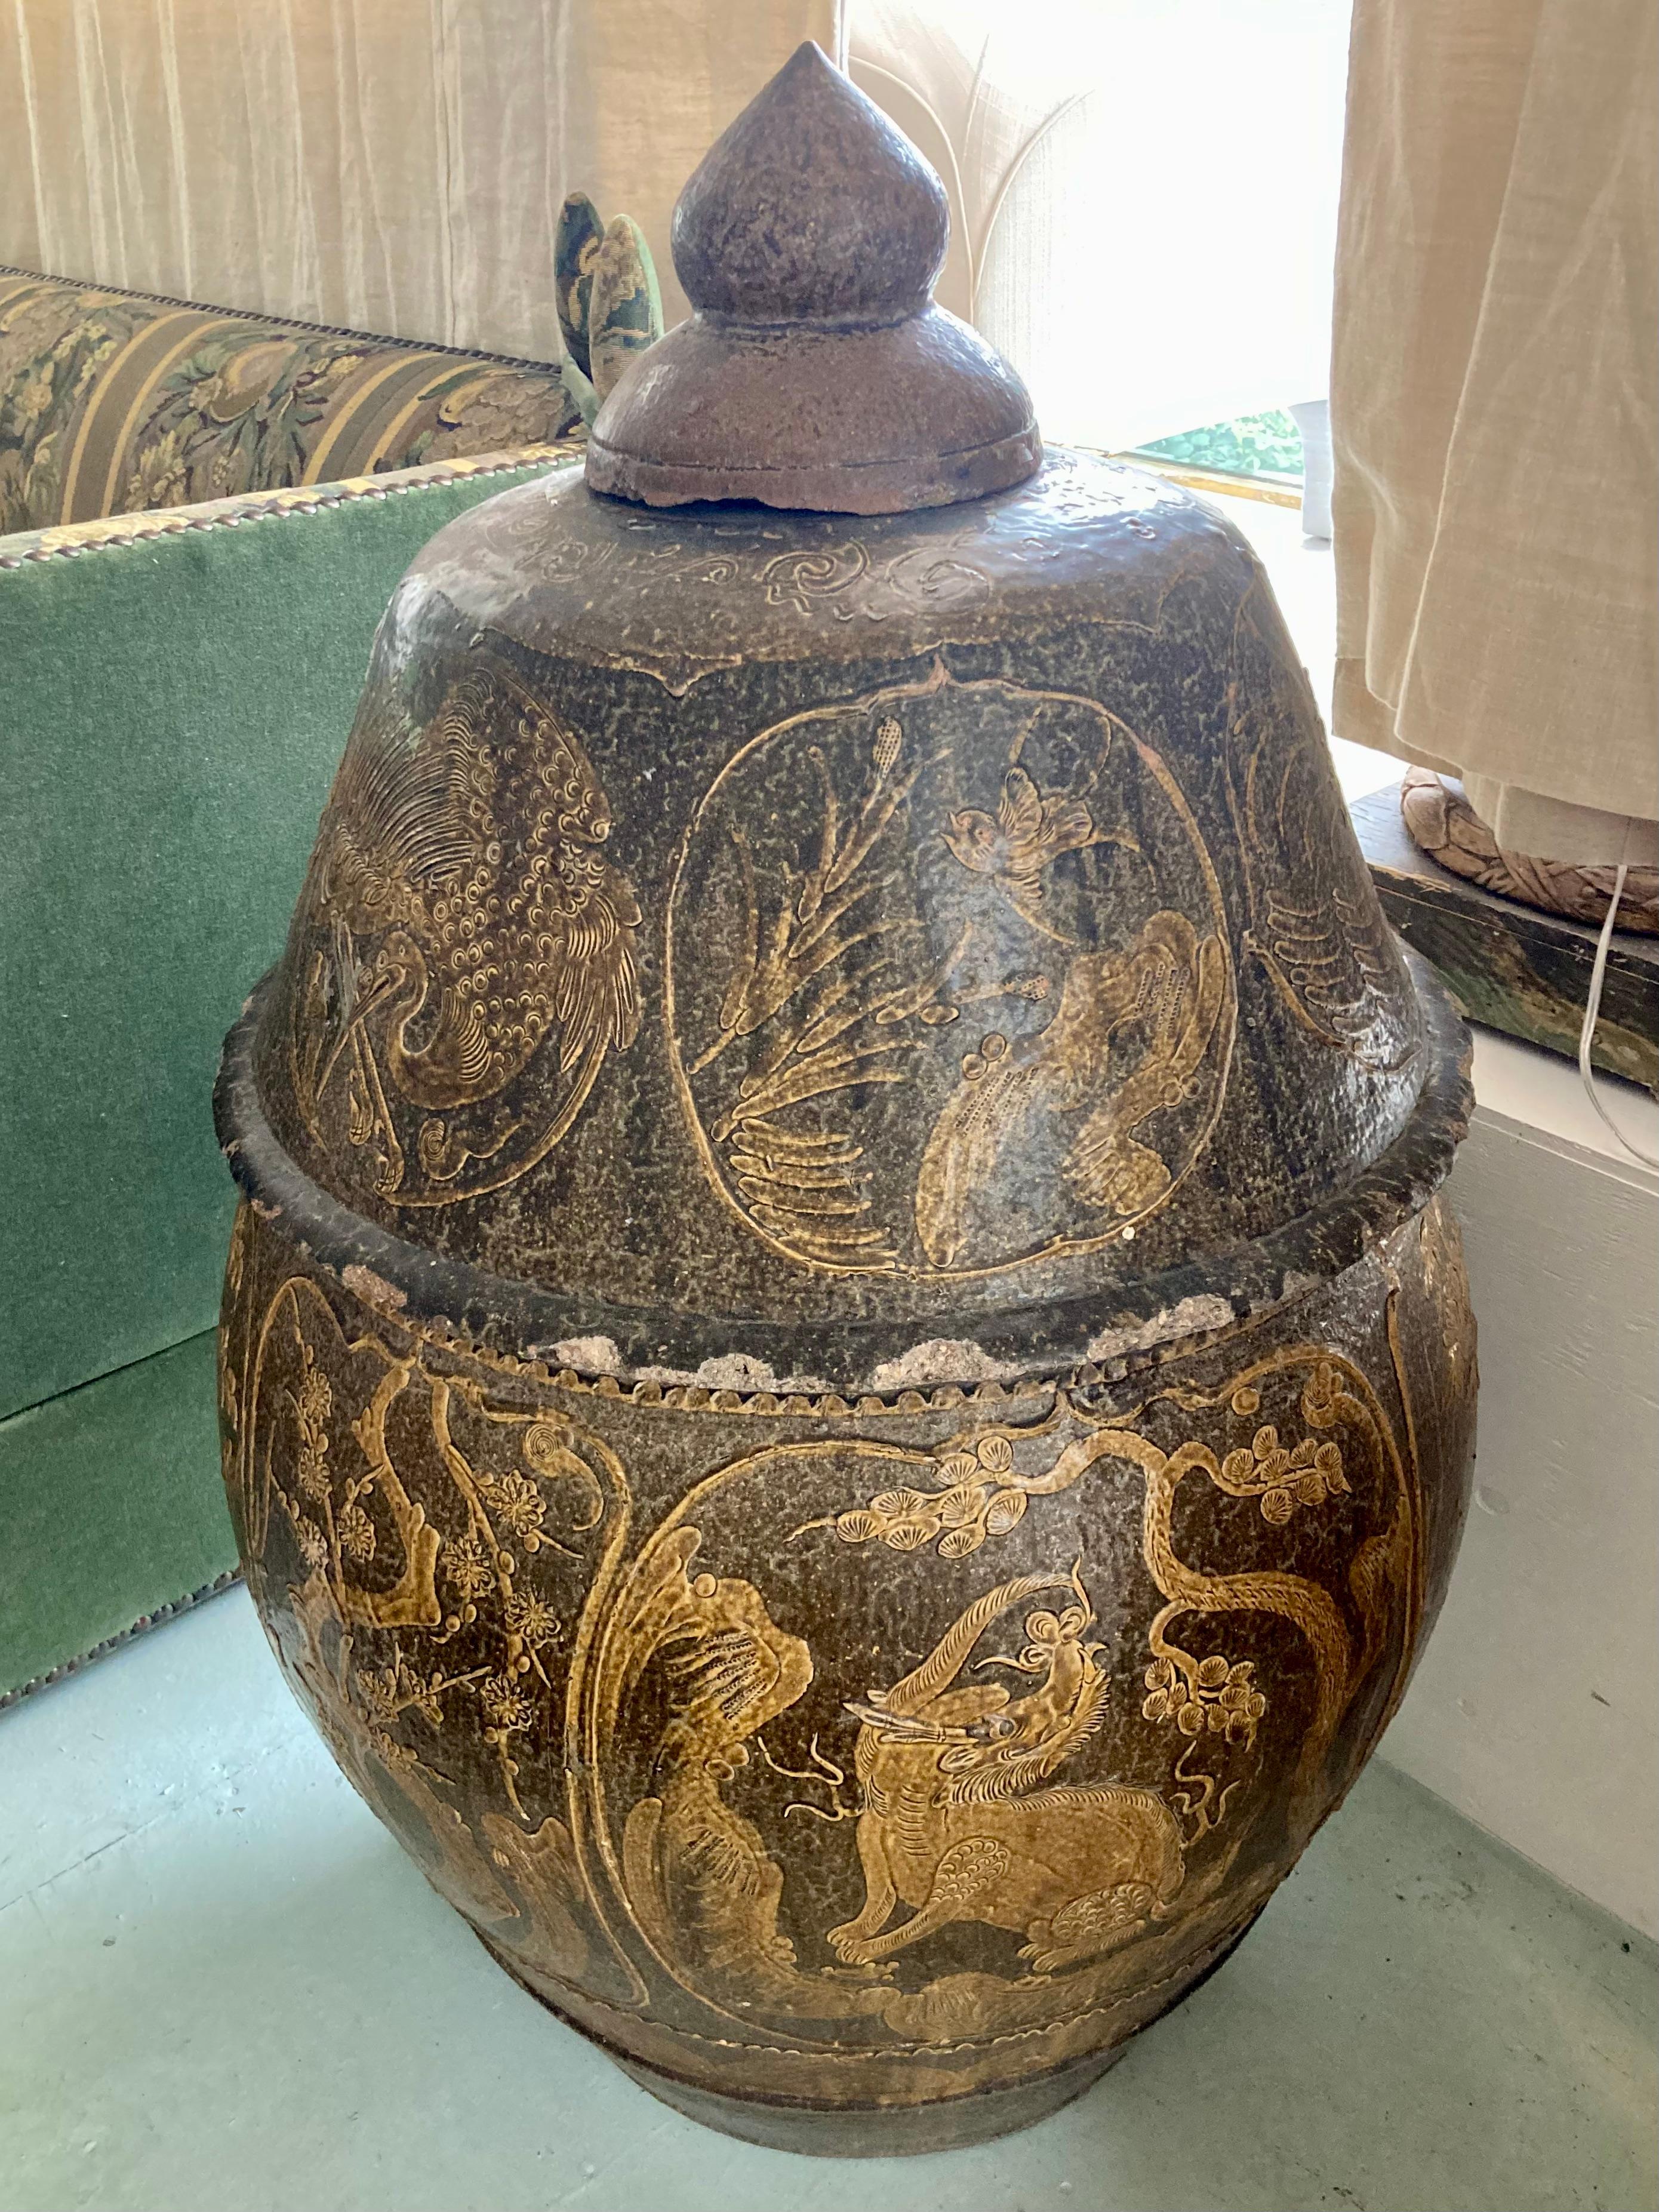 Beautiful large Asian 3-Piece covered egg pot. Super rare egg pot with removable lid and additional removable center detail. Huge scale to certainly add some interest to your garden or patio.